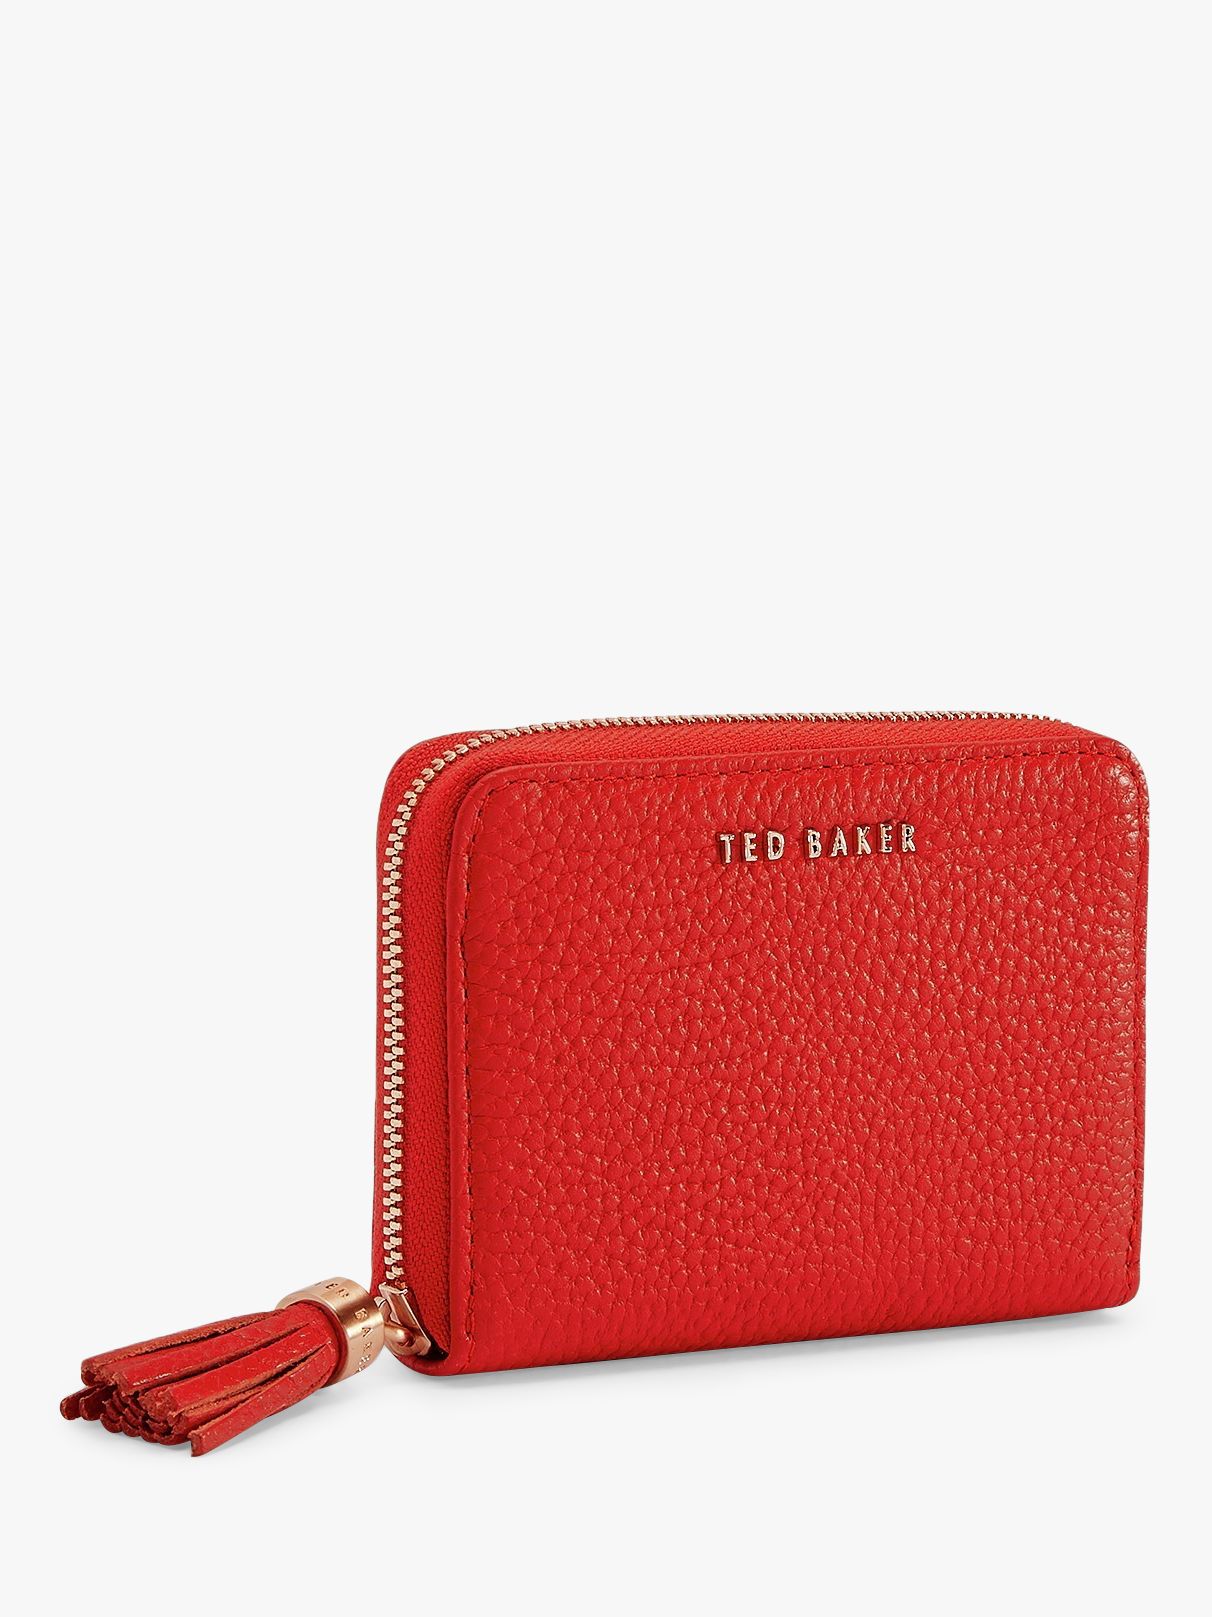 Ted Baker Sabel Small Leather Zip Around Matinee Purse